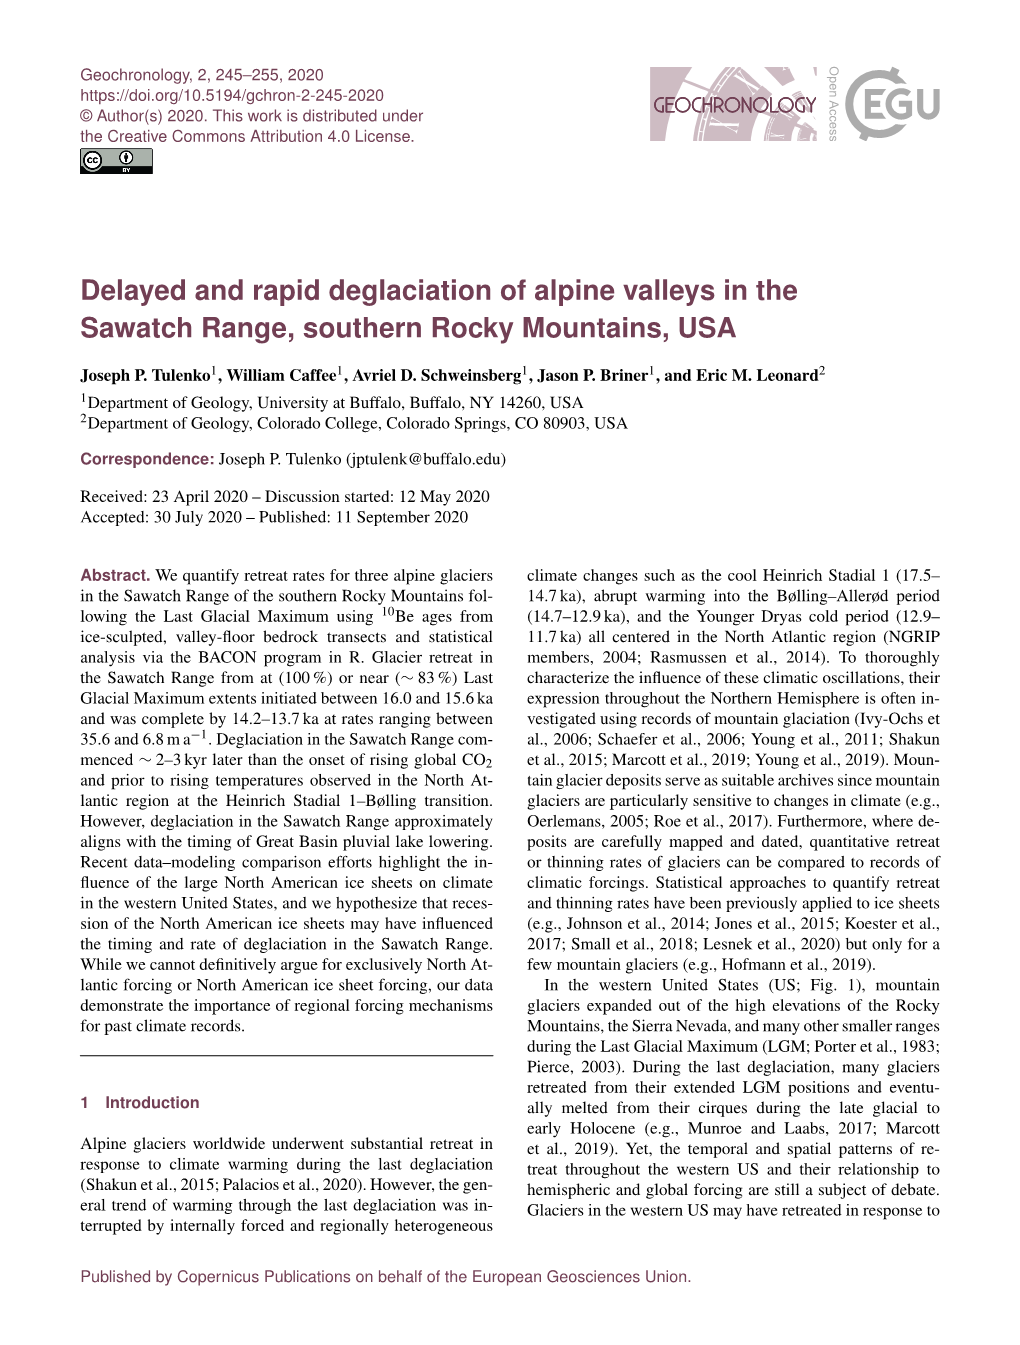 Delayed and Rapid Deglaciation of Alpine Valleys in the Sawatch Range, Southern Rocky Mountains, USA